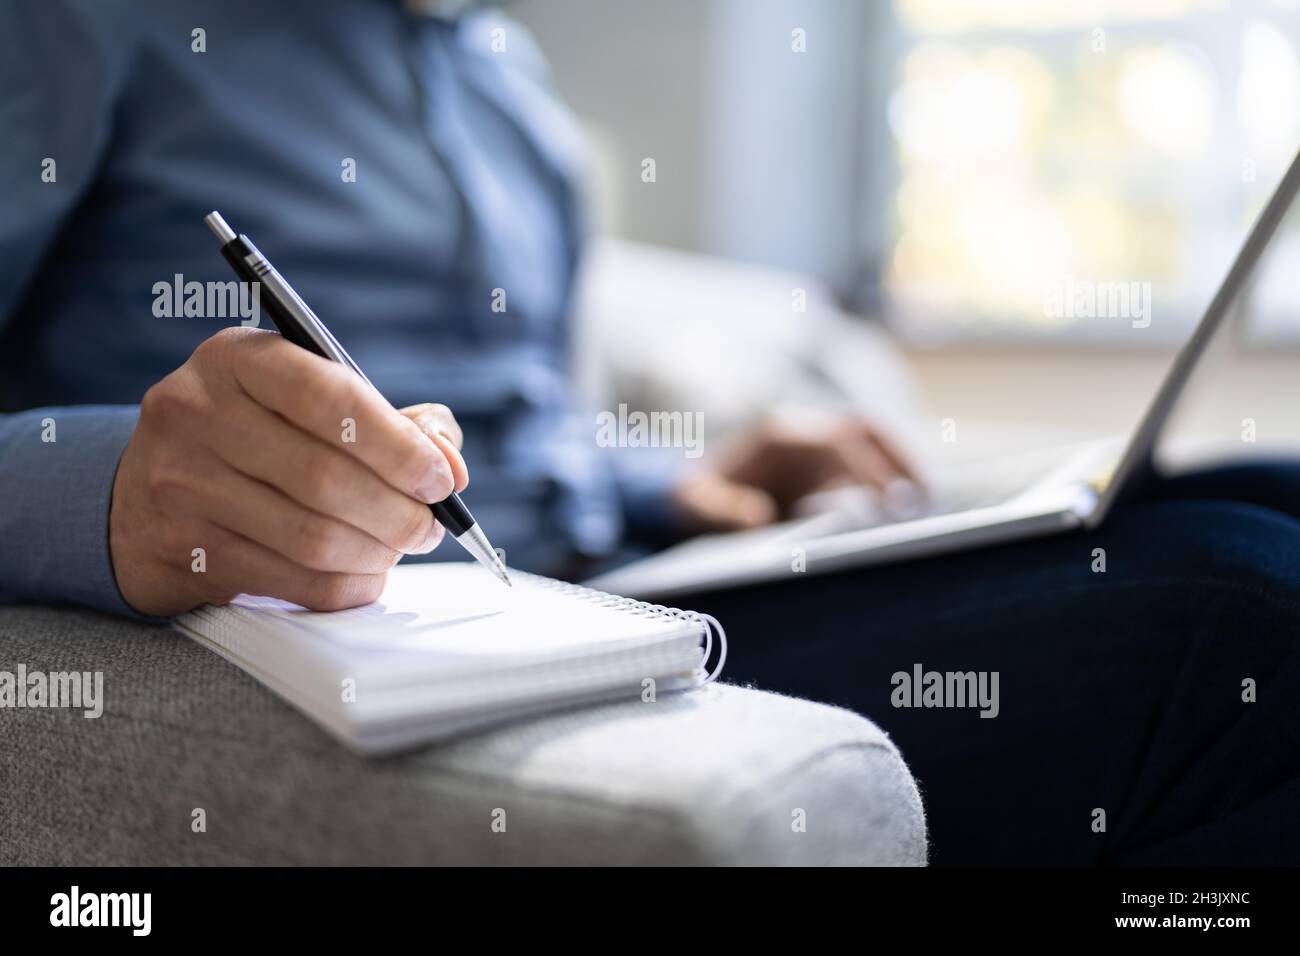 Someone Writing Or Planning. Journalist Working On Laptop Stock Photo